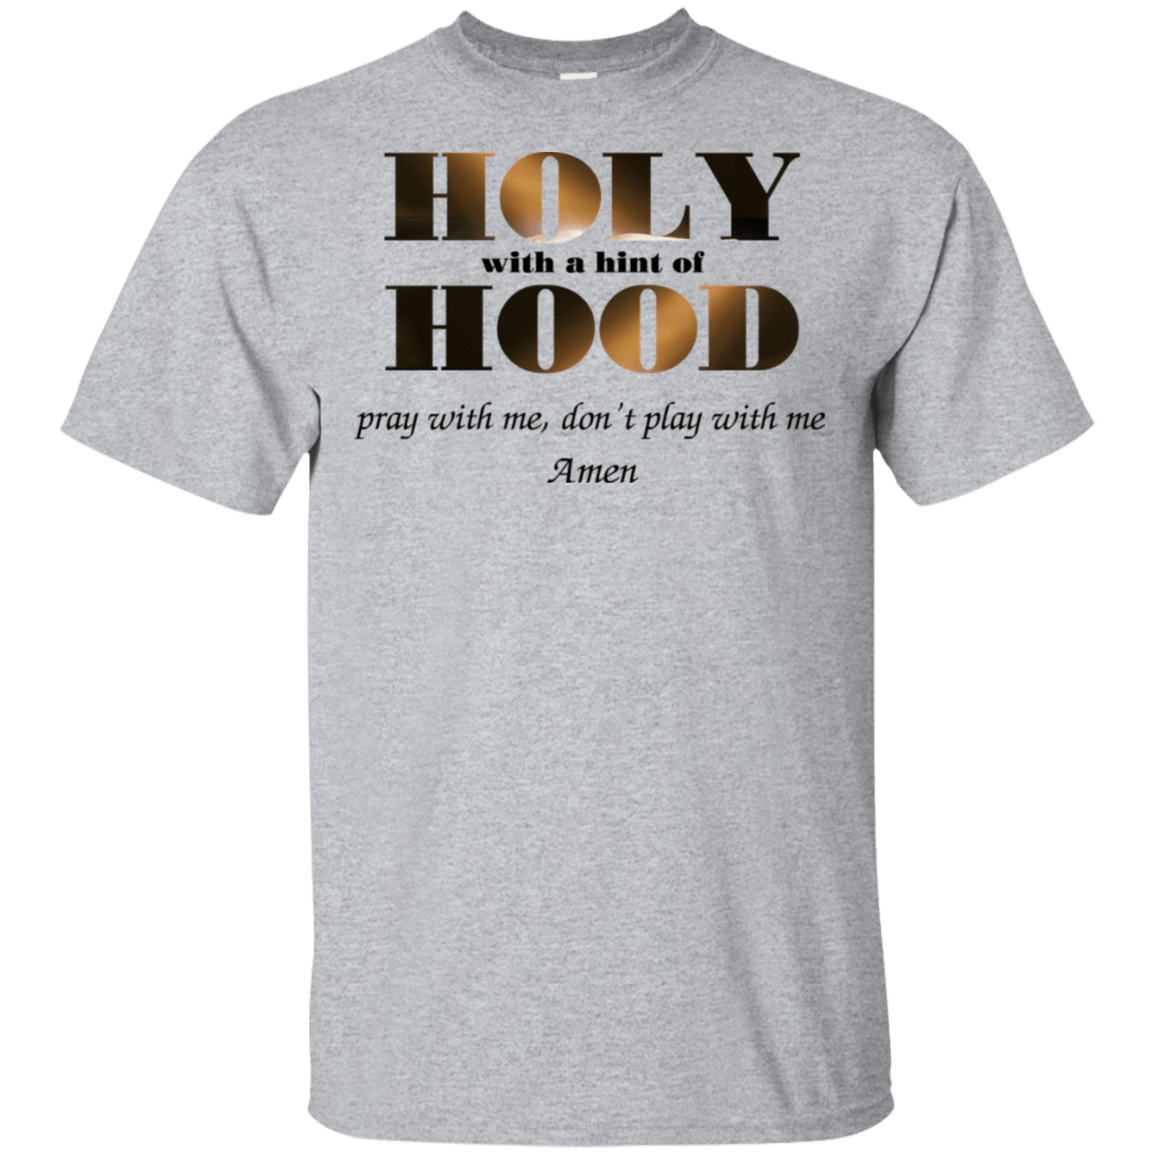 holy with a hint of hood shirt